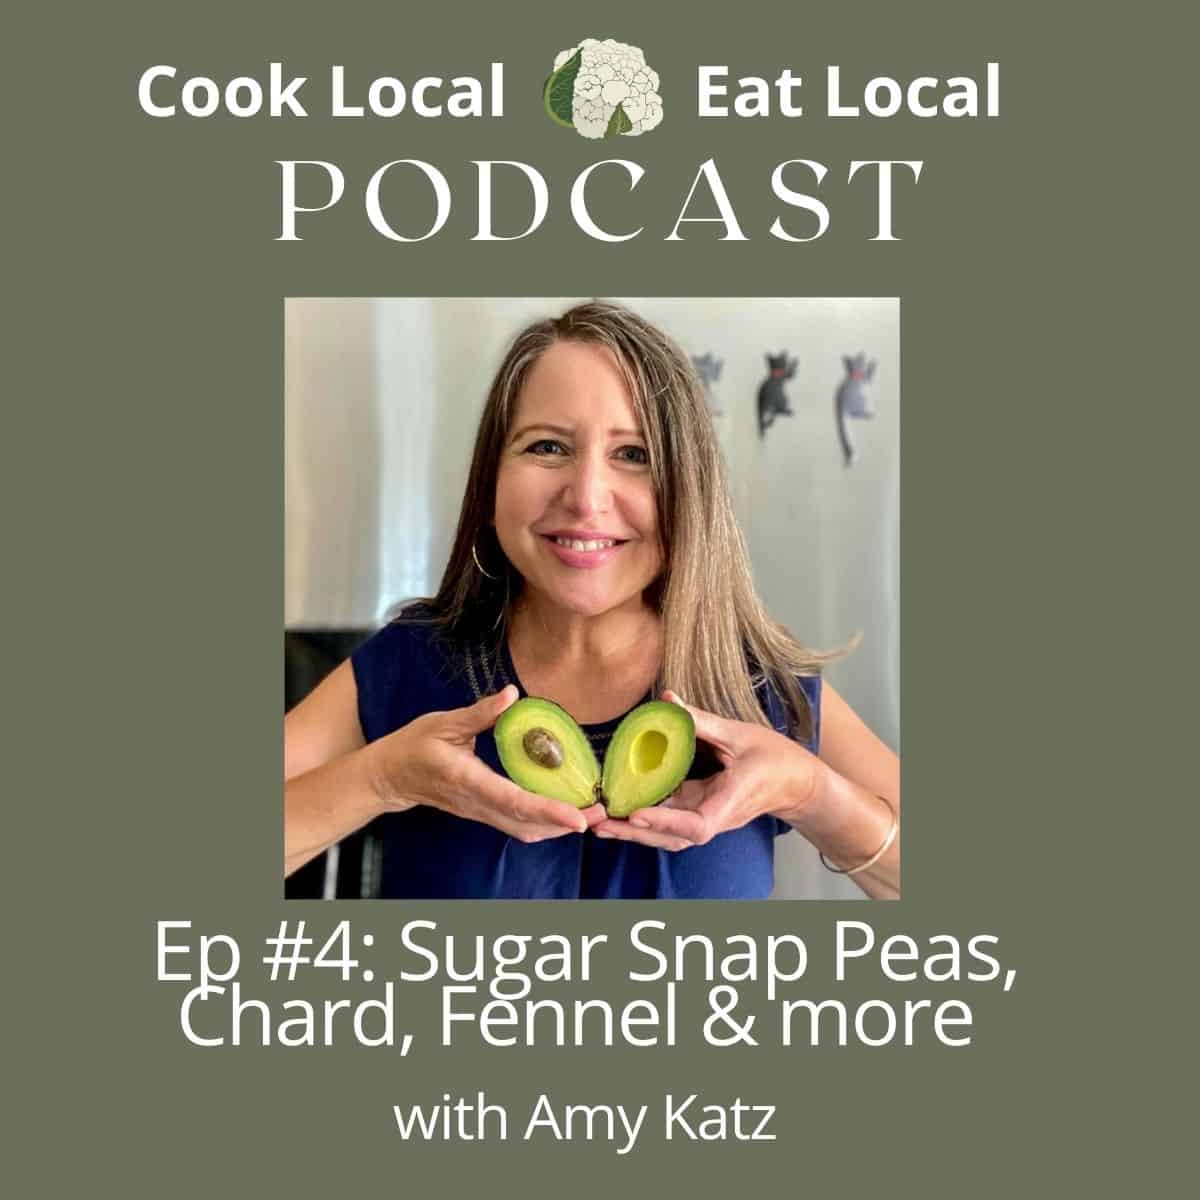 Graphic with podcast title "Cook Local, Eat Local - Episode 4 Sugar Snap Peas, Chard, Fennel and More" with a photo of the show guest, Amy Katz.